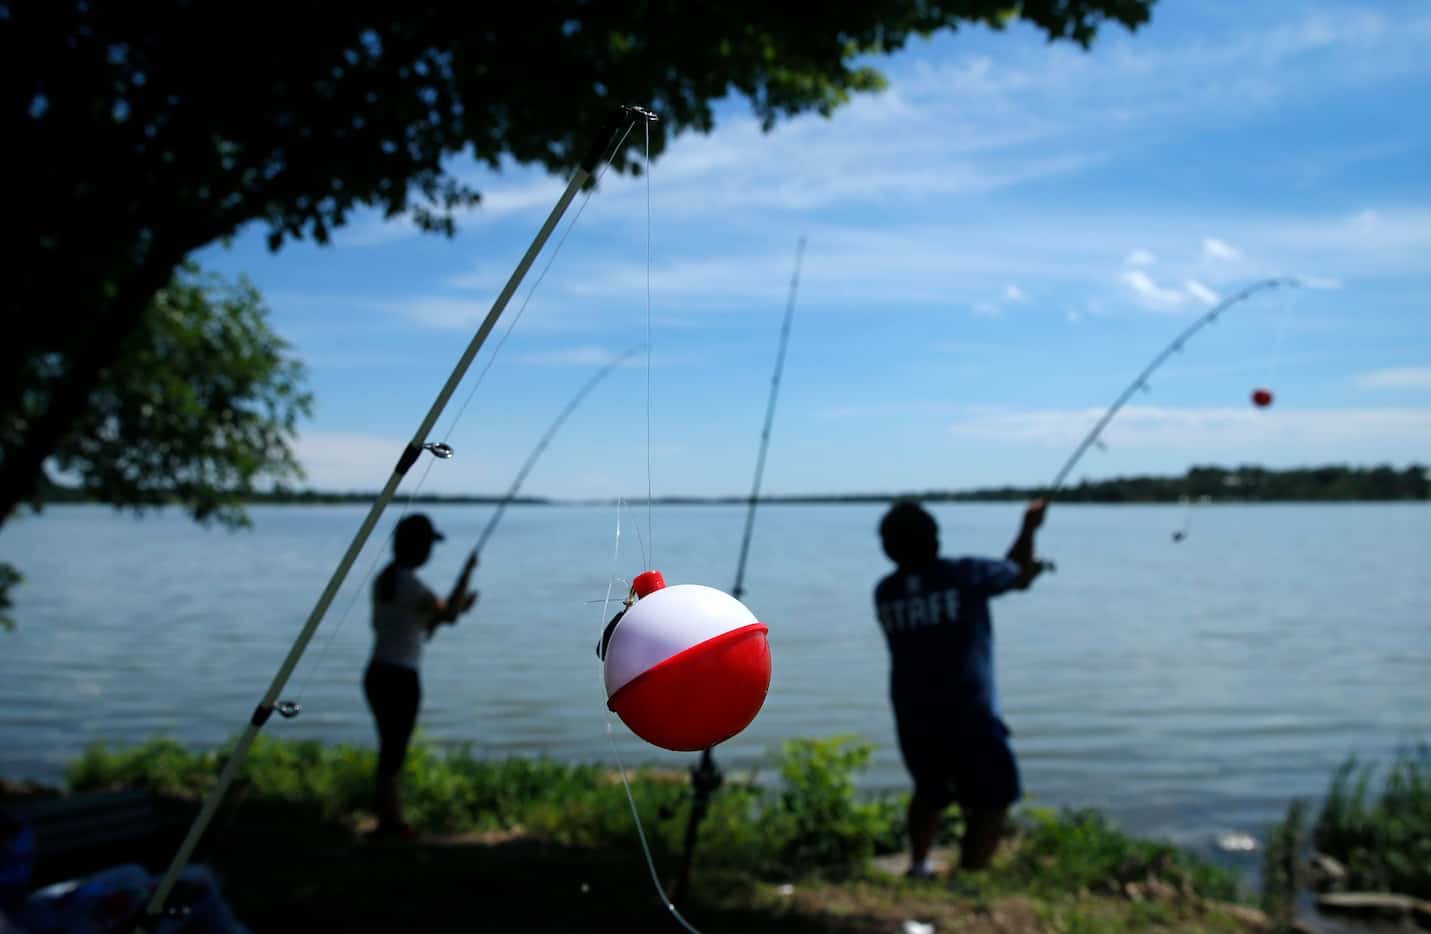 Oscar Resendiz of Dallas casts his line at White Rock Lake in Dallas as he fishes with his...